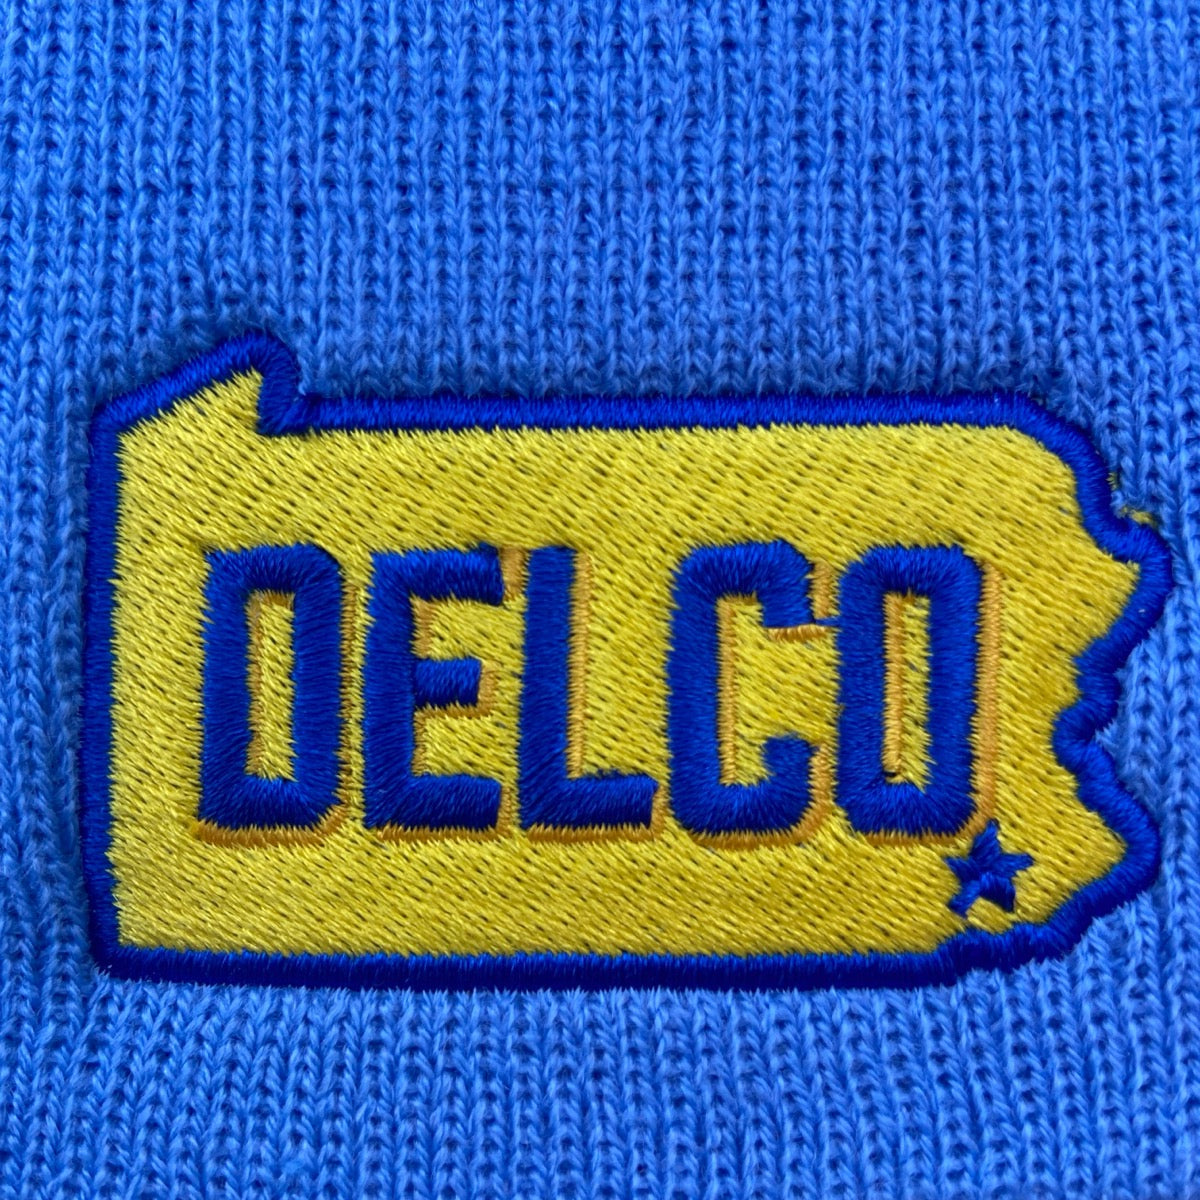 BlueRooted - DELCO Cougar Beanie